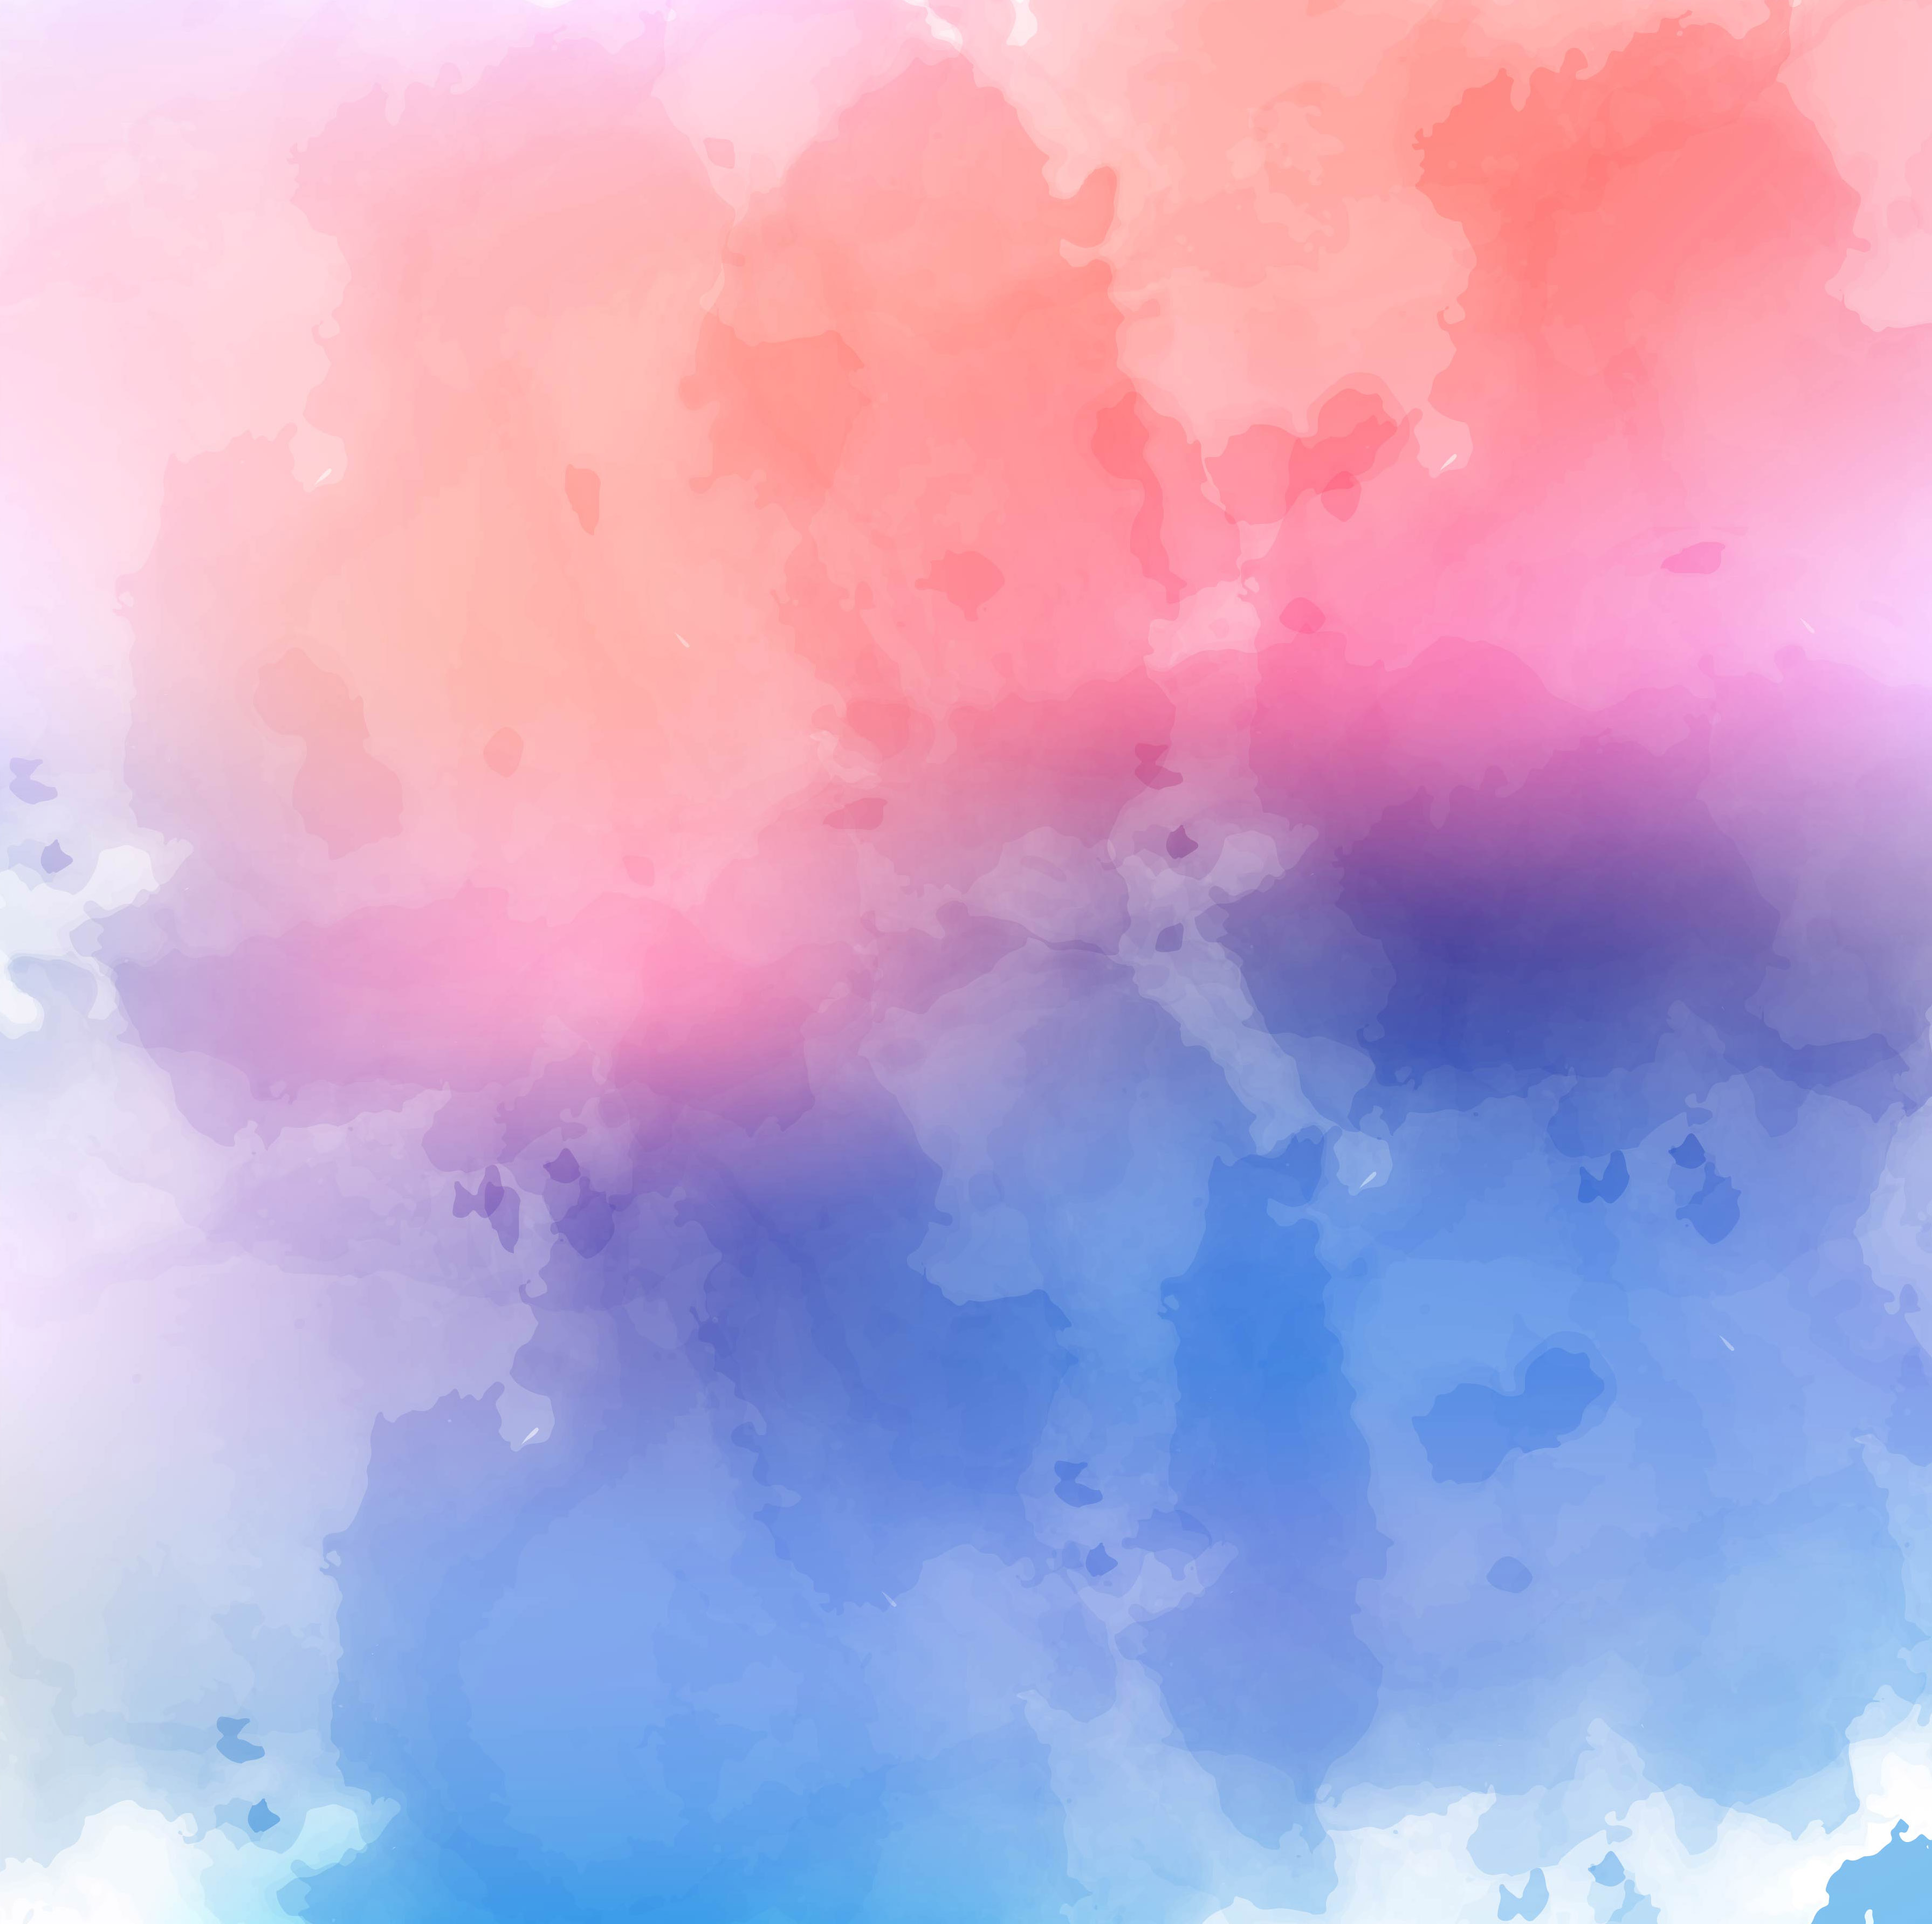 82 Abstract Background Watercolor Images - MyWeb